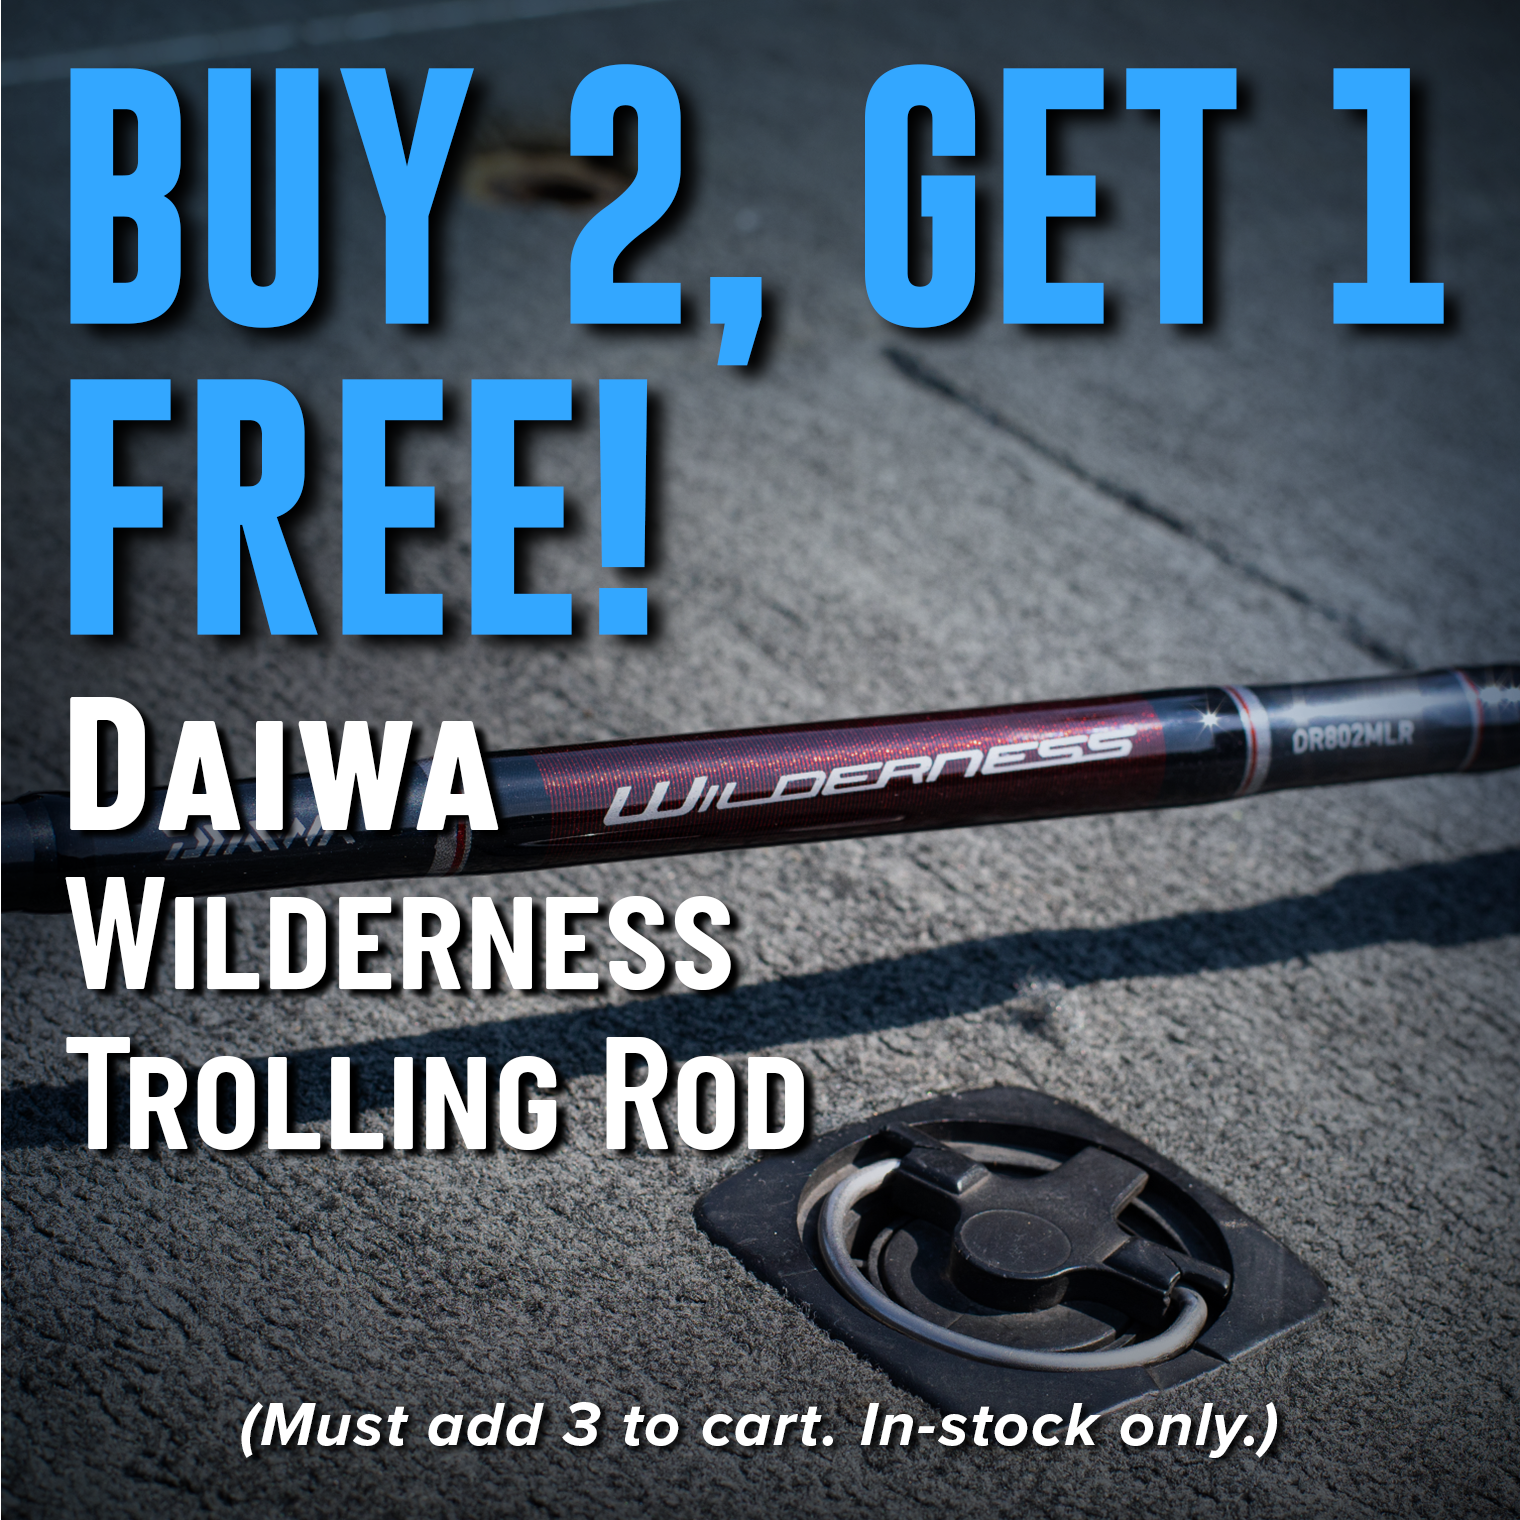 Buy 2, Get 1 Free! Daiwa Wilderness Trolling Rod (Must add 3 to cart. In-stock only.)